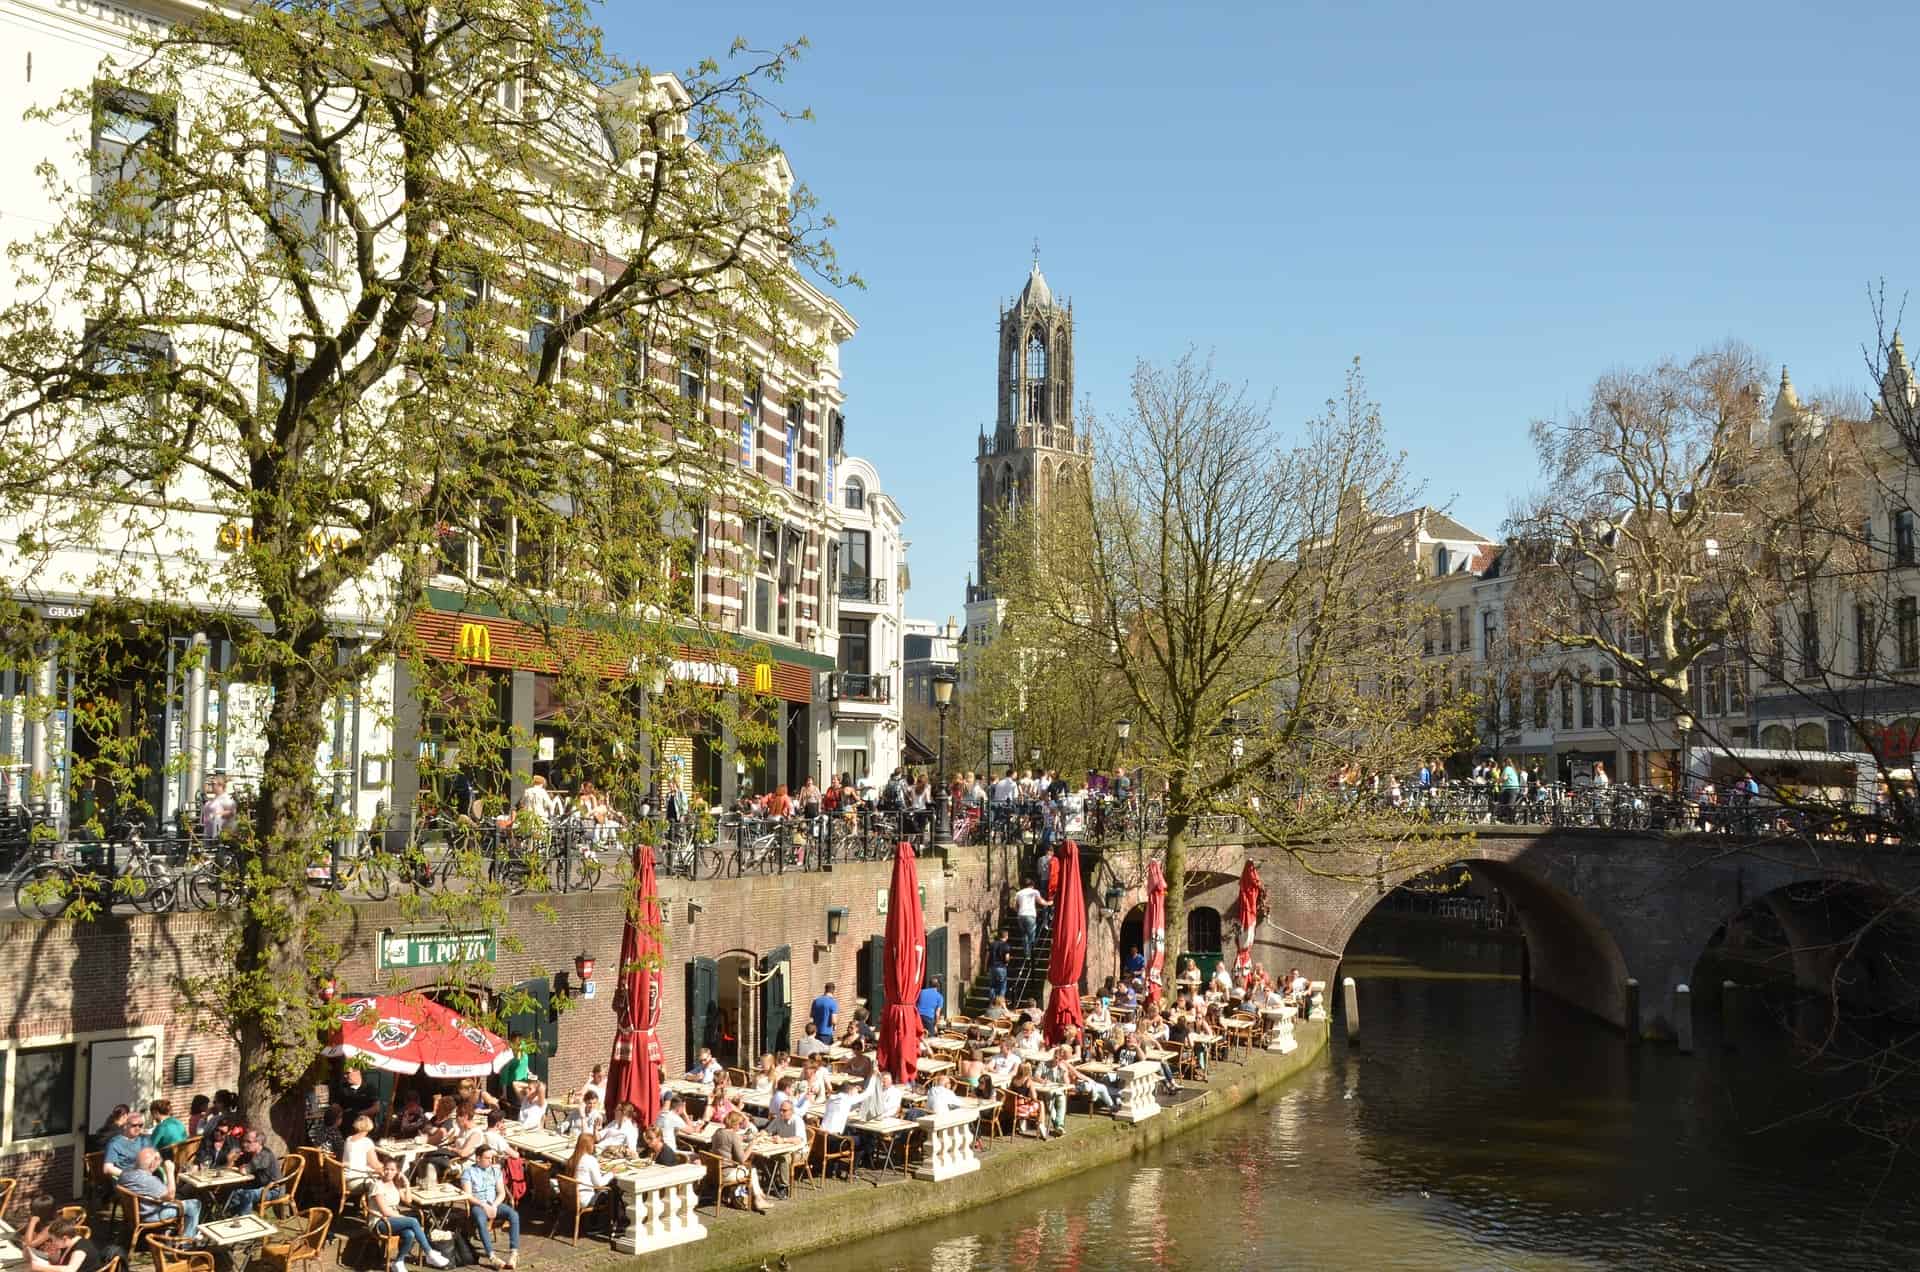 Utrecht and The Hague pilot cities in European mobility data project